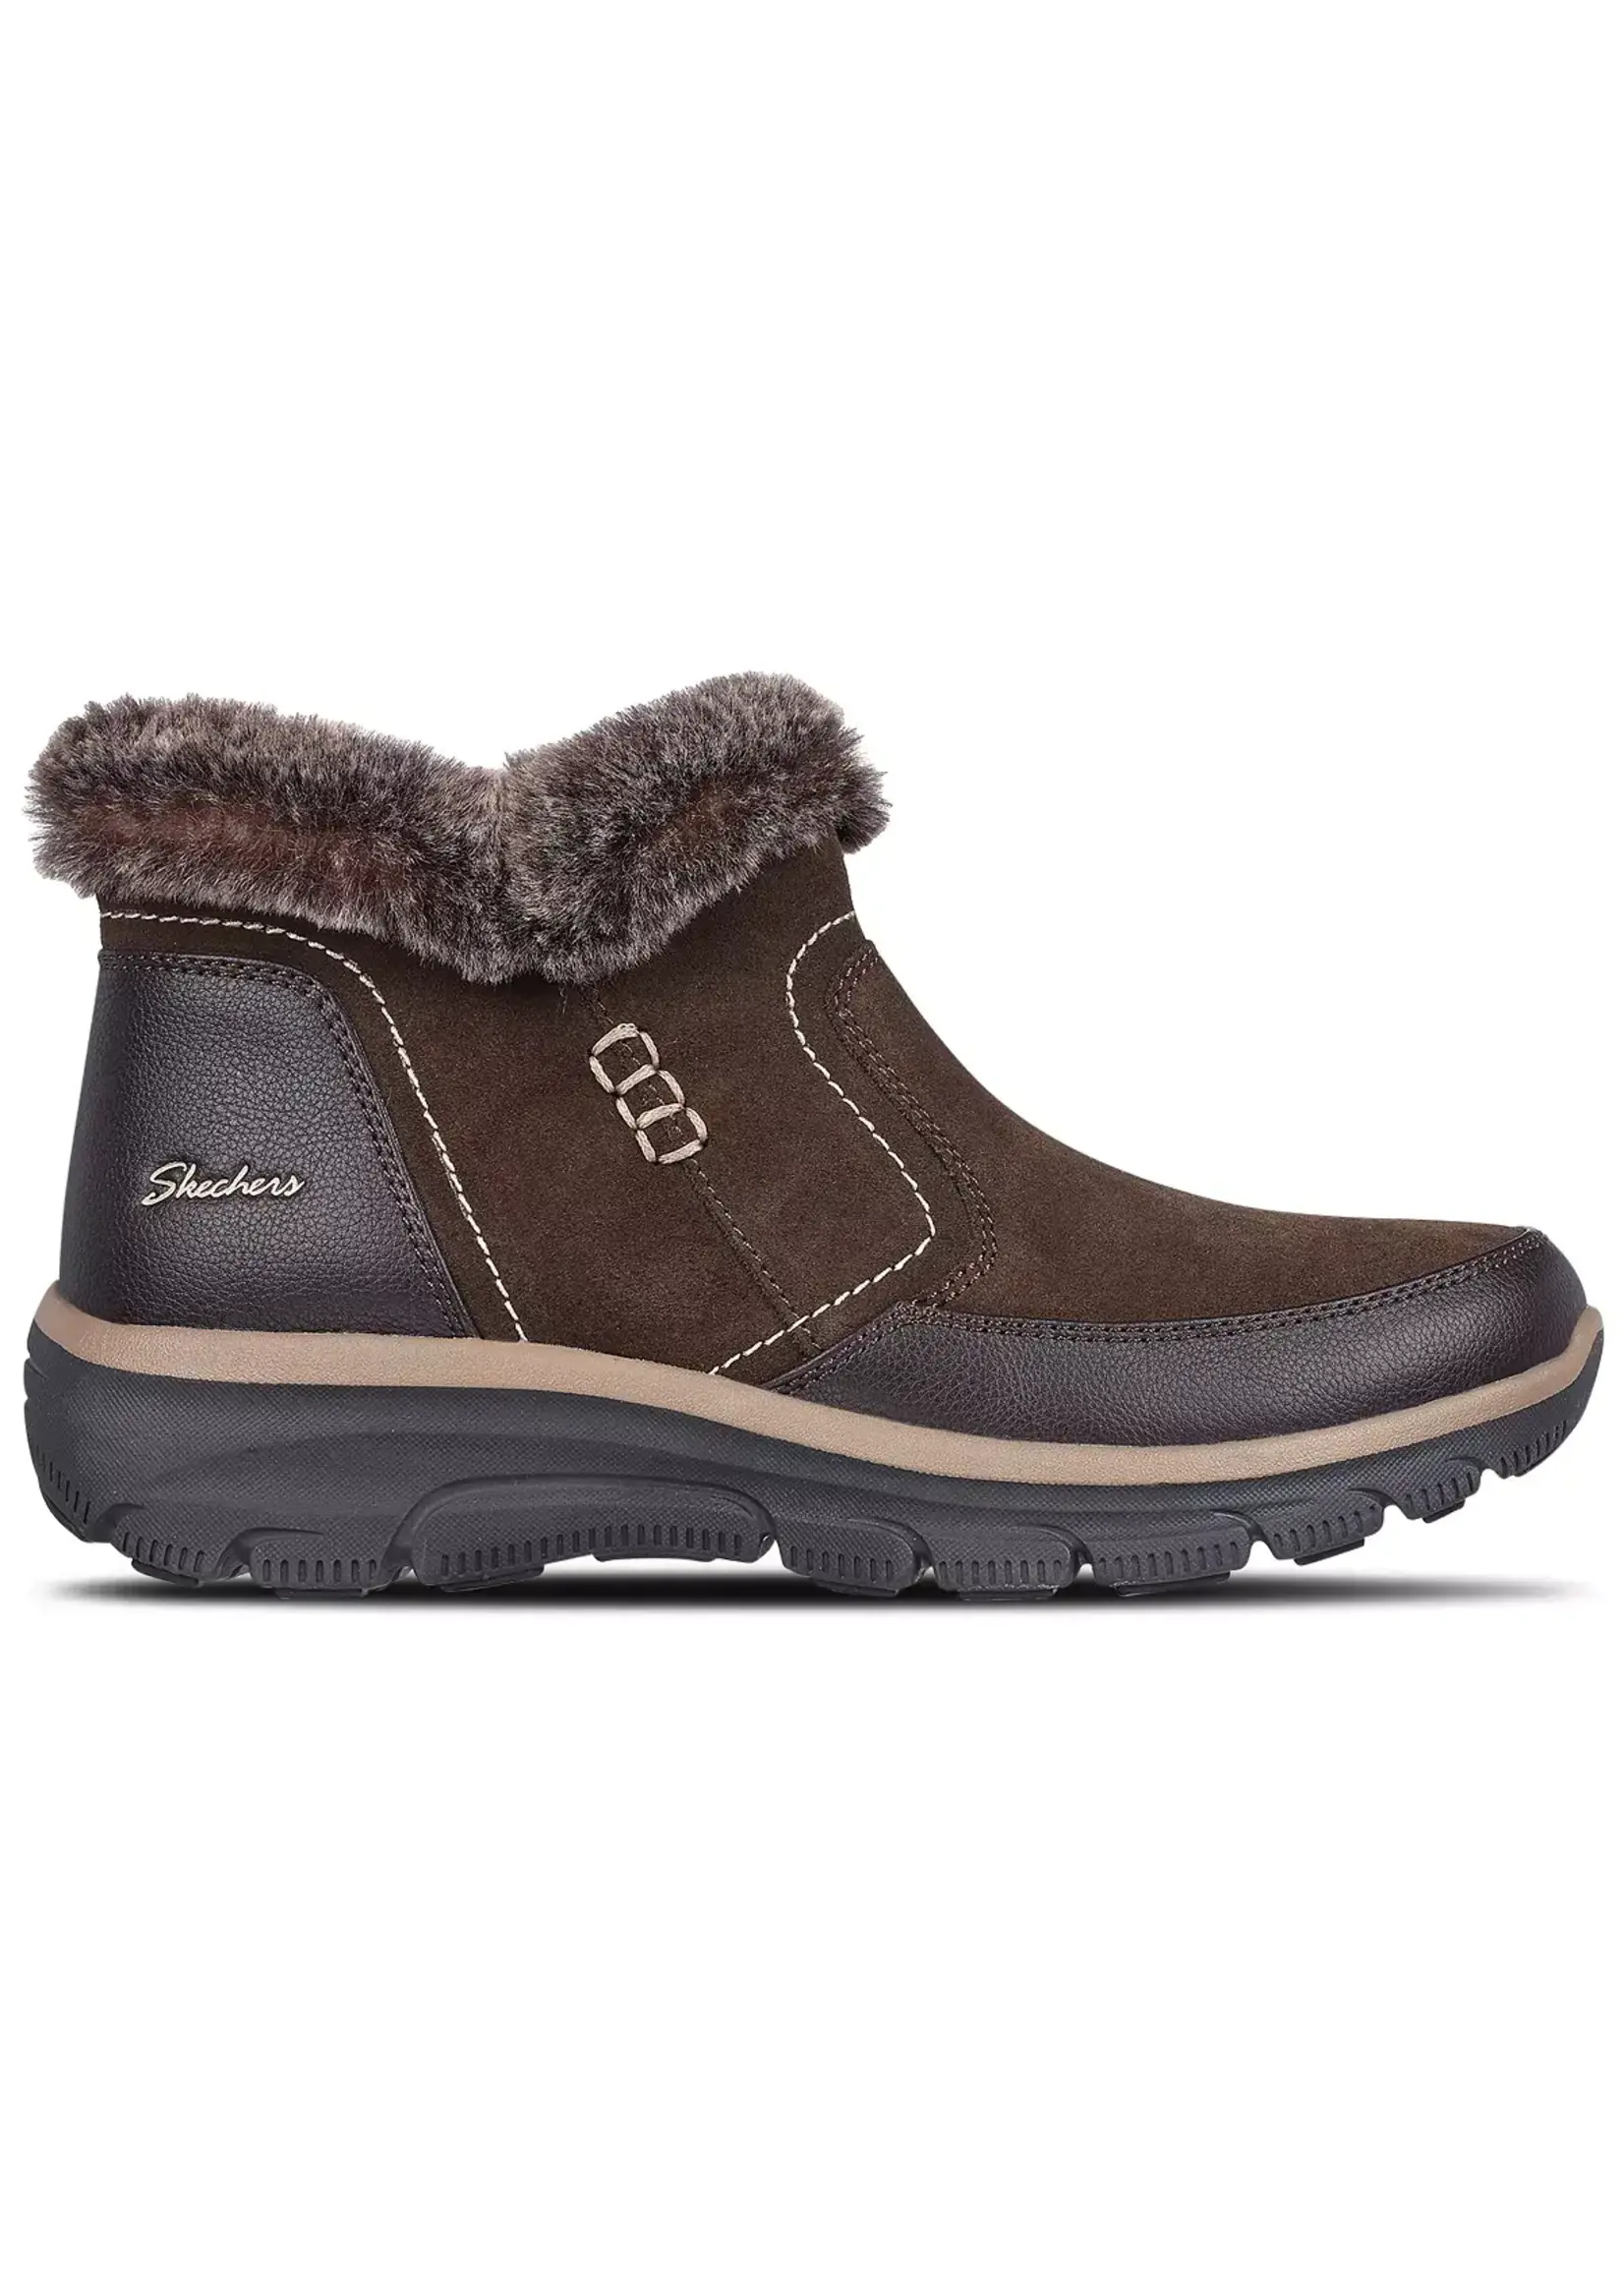 Skechers Women's Easy Going Warm Escape Fashion Boot Chocolate